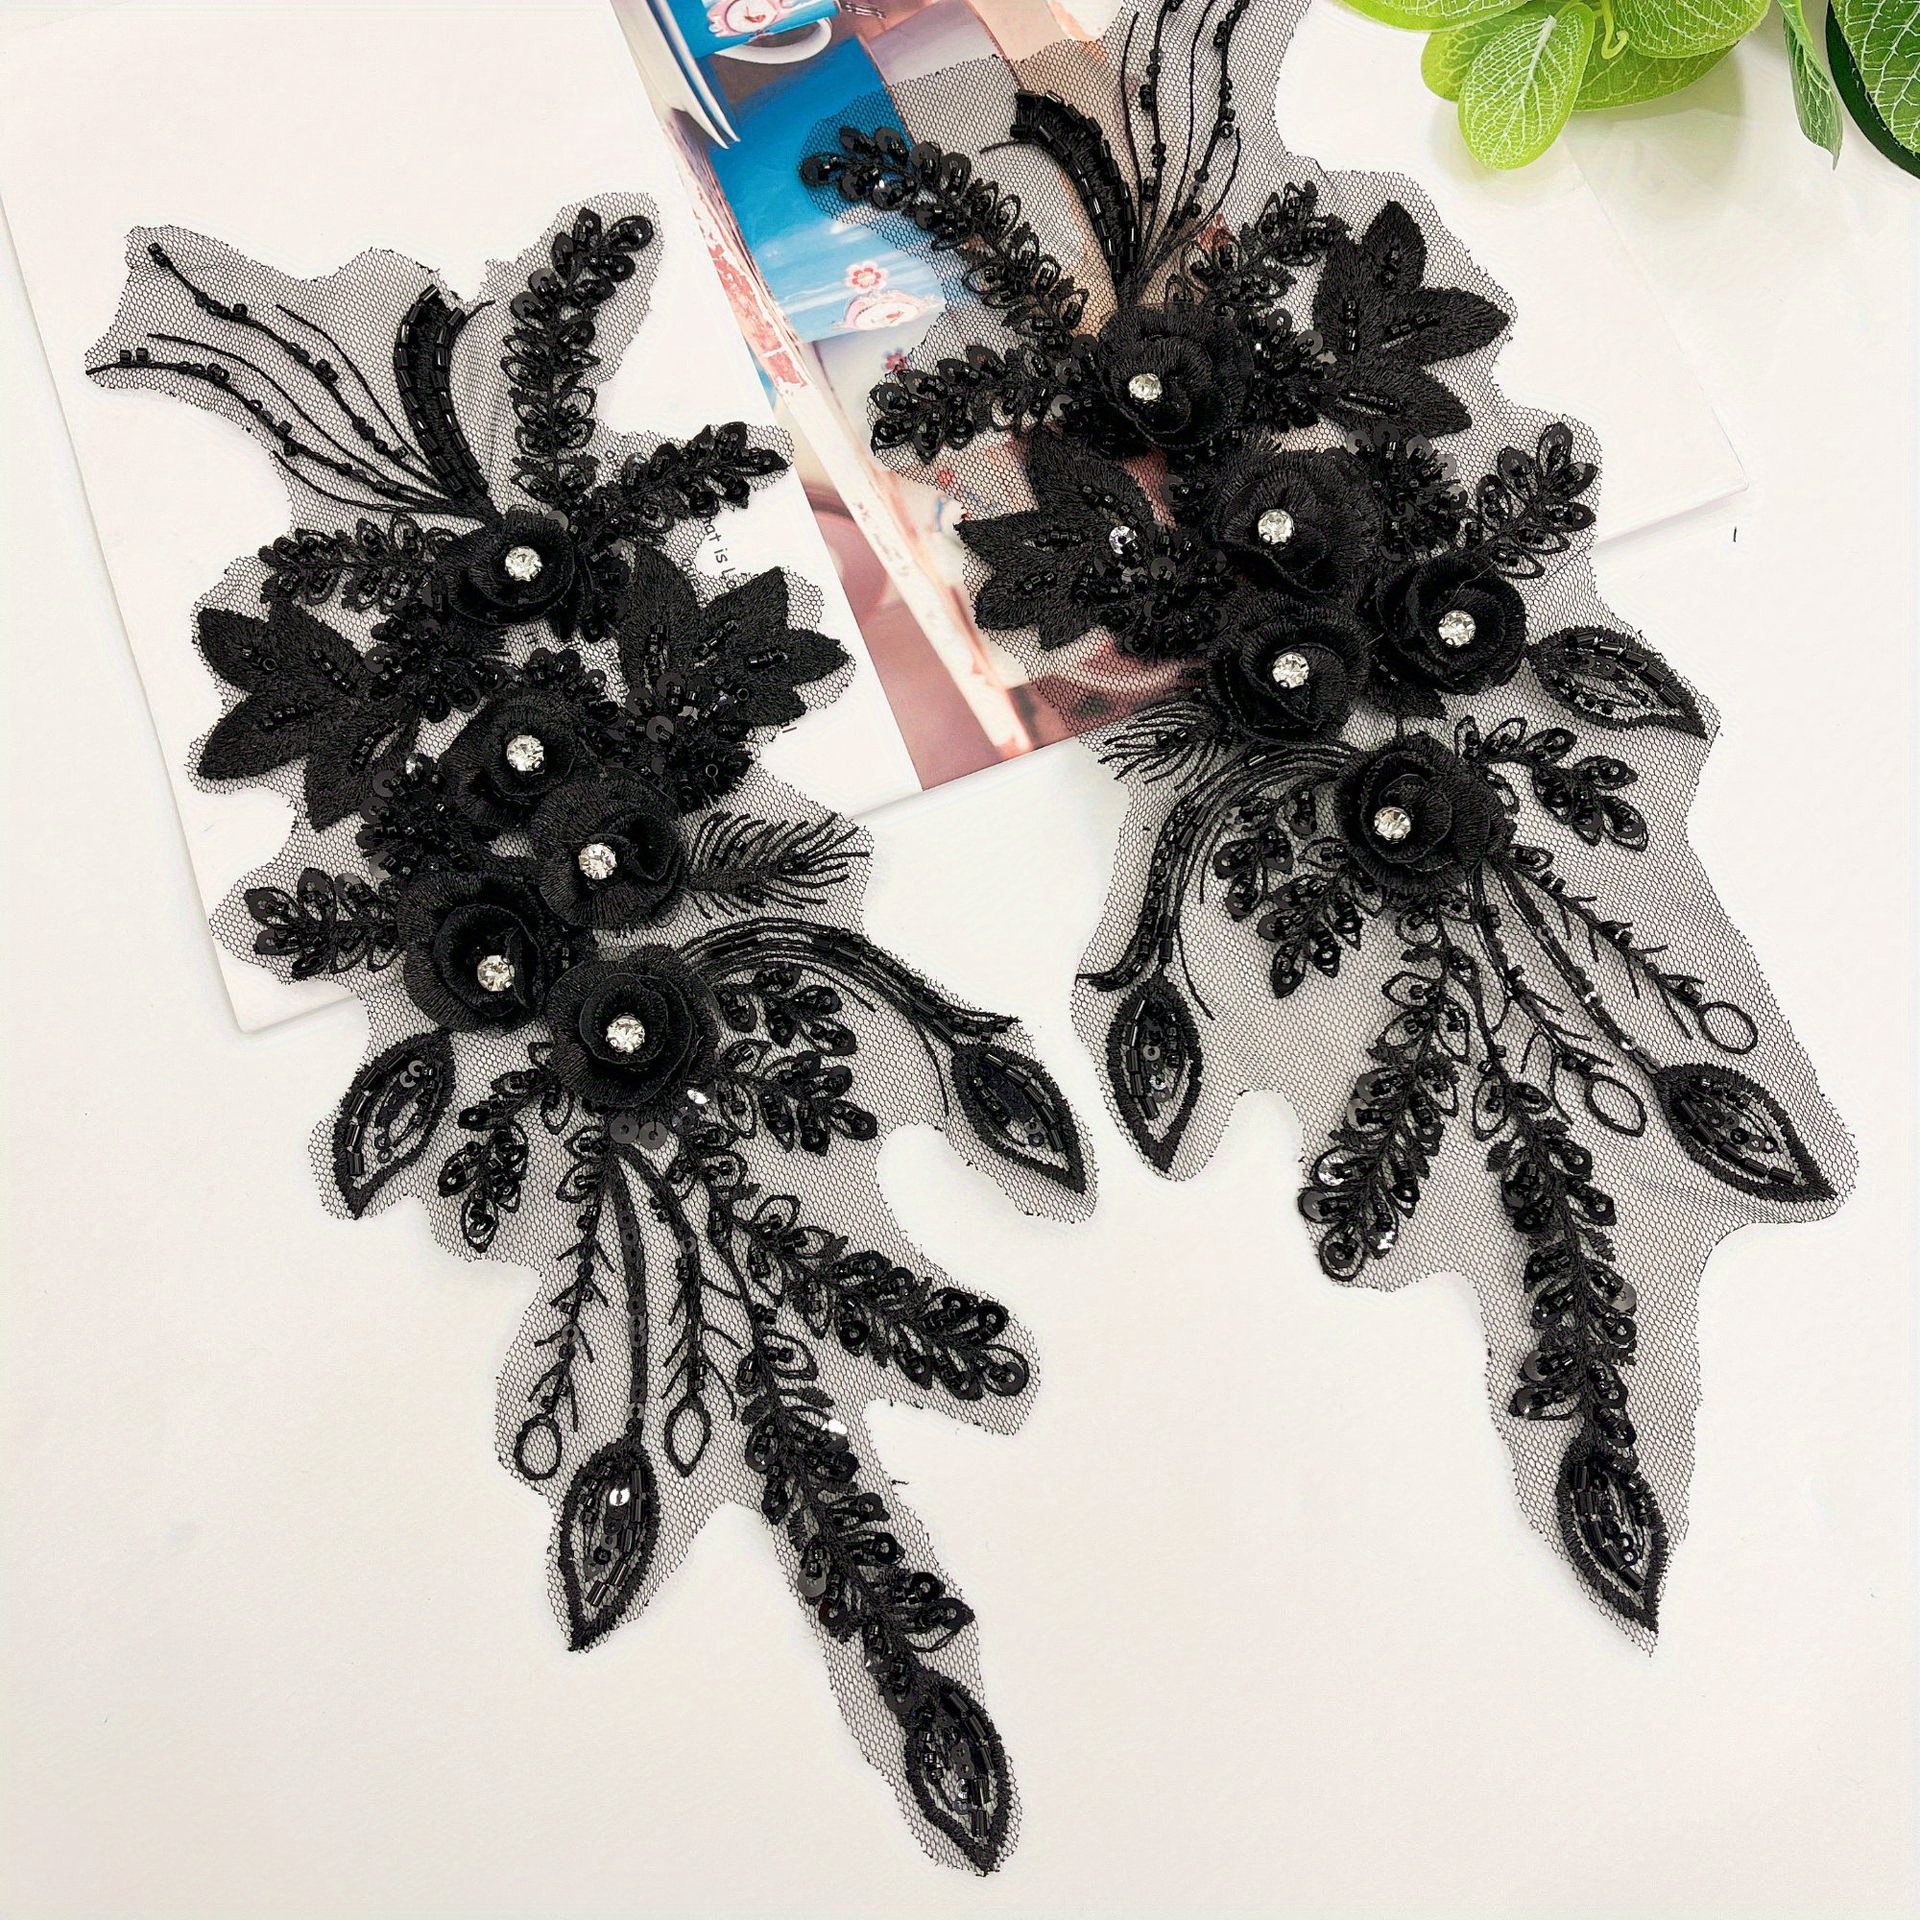 20 Pcs Black Embroidery Lace Flower Patches Appliques DIY Craft Cloth Sew on Patches for Decoration Sewing Repairing of Cloth Clothing, Size: 68 mm x